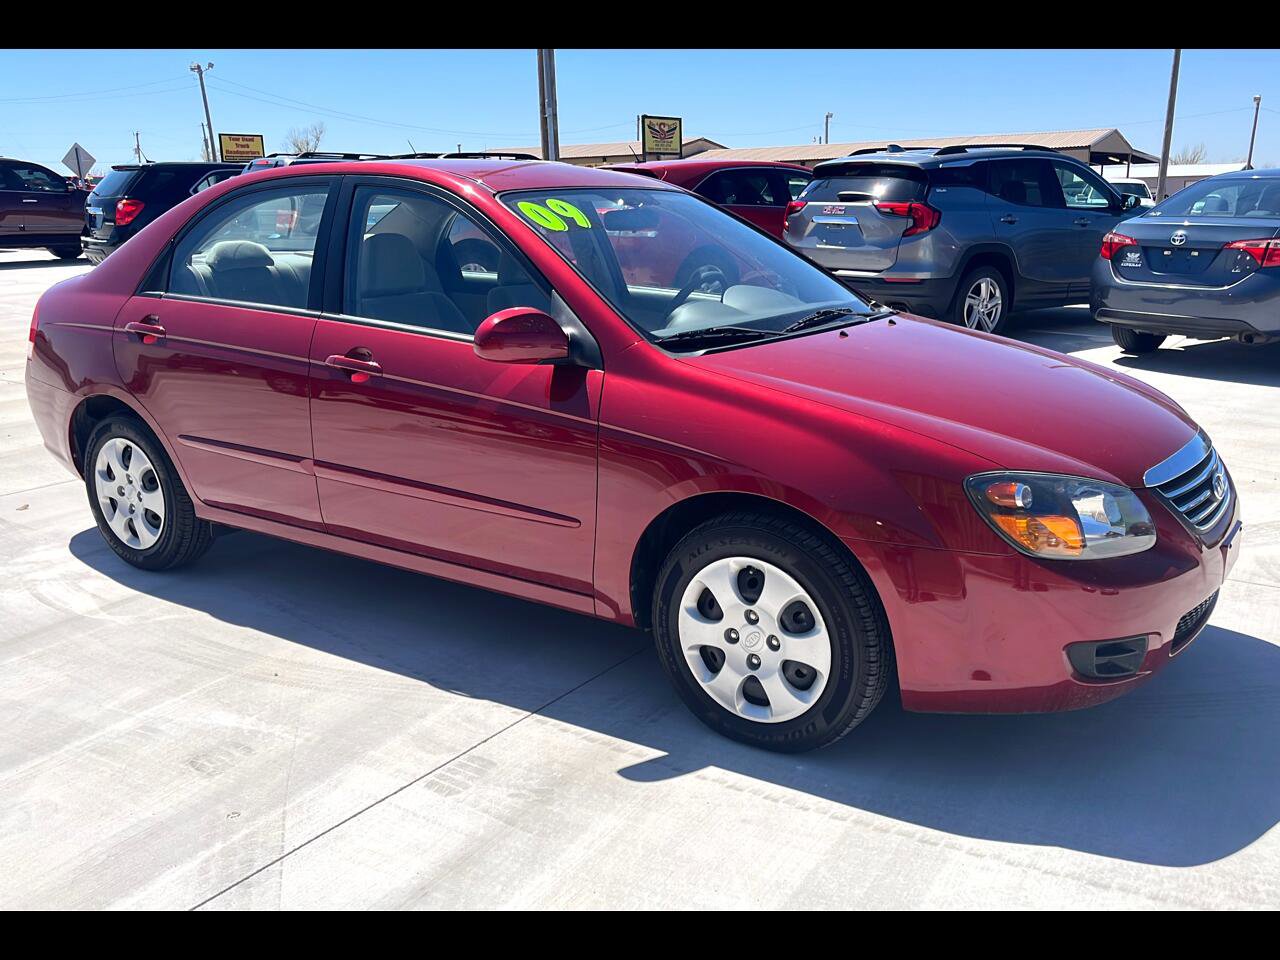 Used 2009 Kia Spectra for Sale Right Now - Autotrader